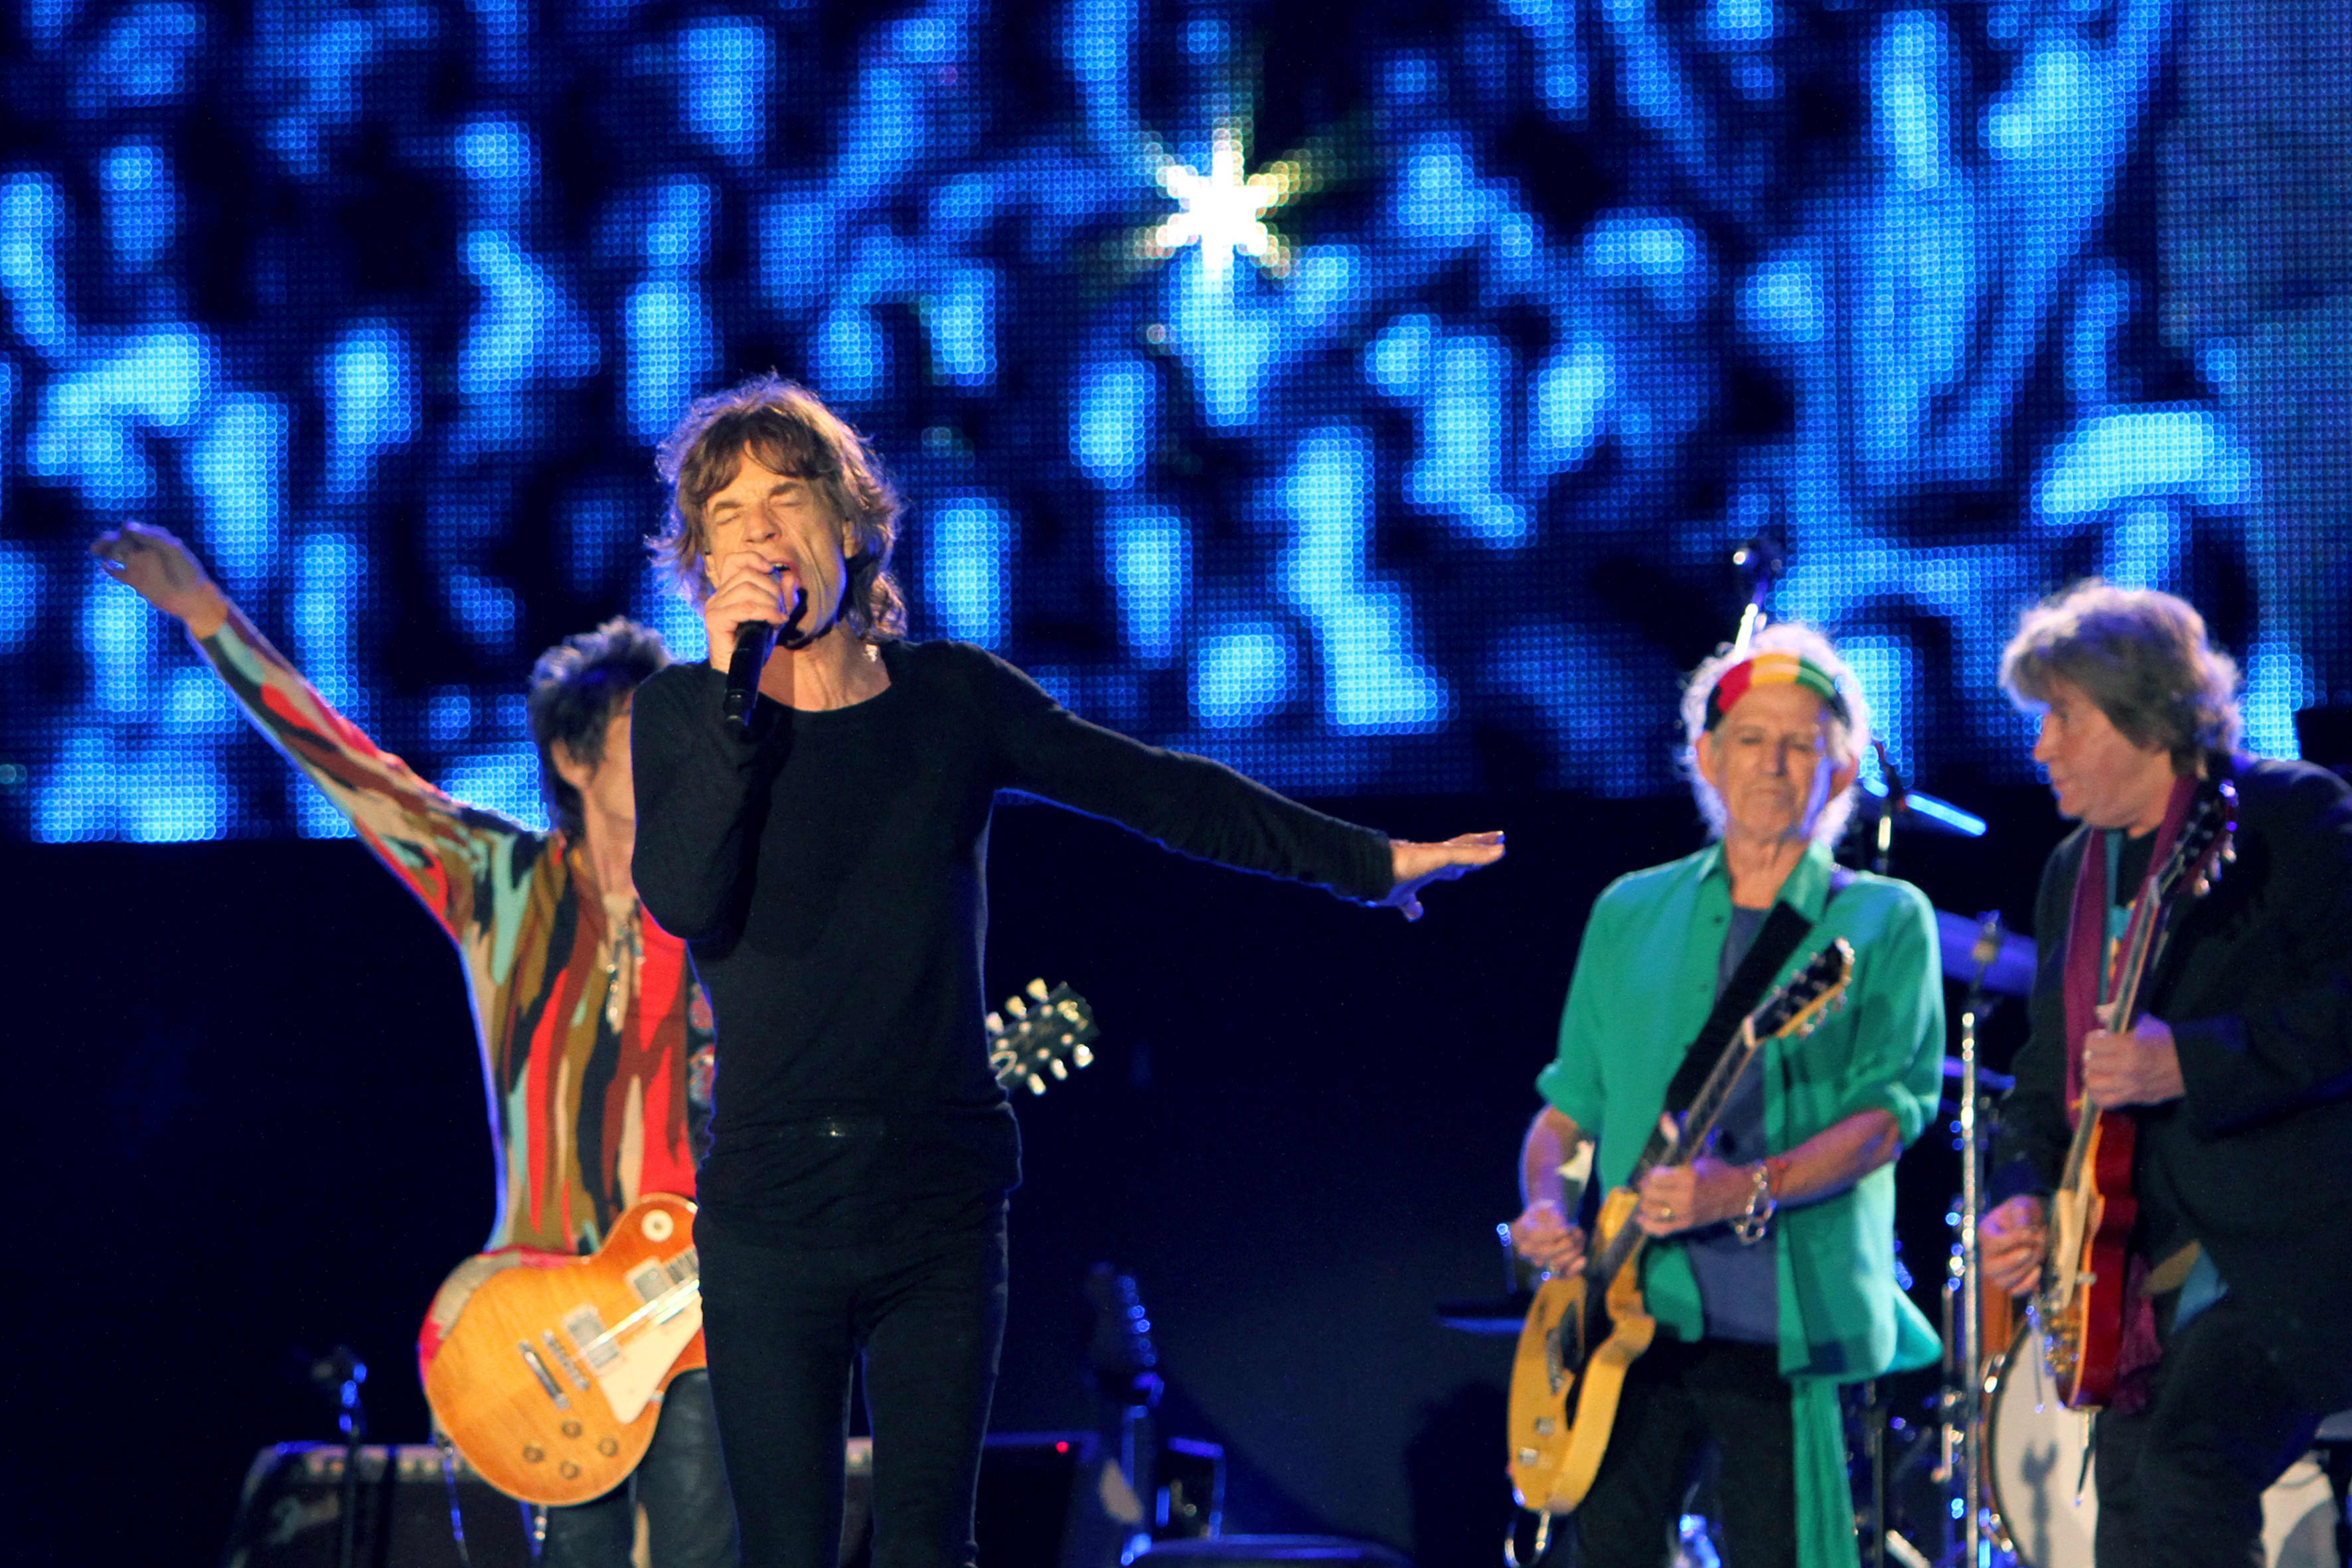 Rose Bowl Concert Seating Chart Rolling Stones